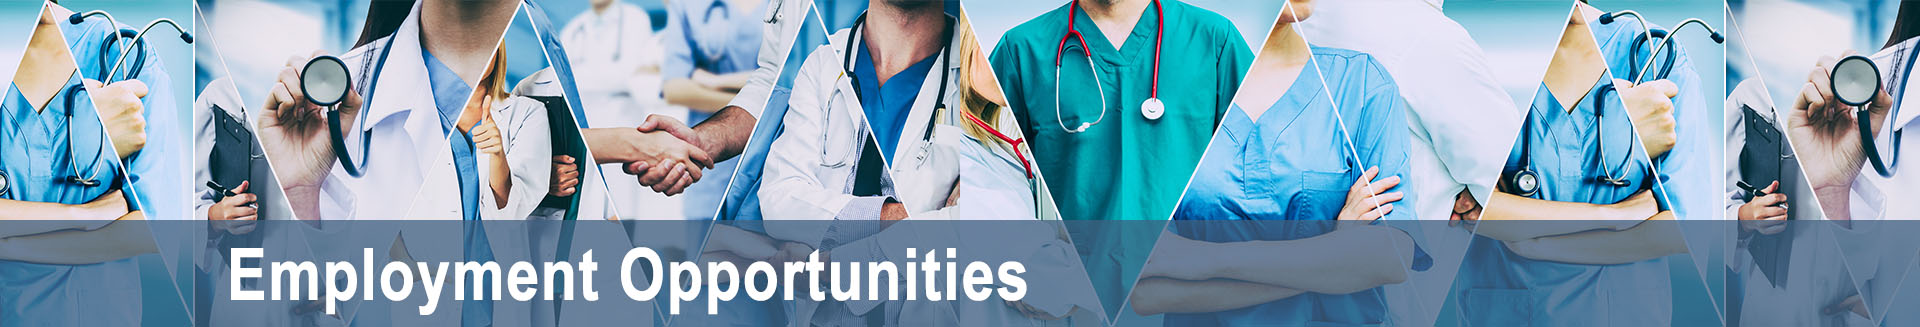 Physicians Assistant Services of Texas LLP Employment Opportunities